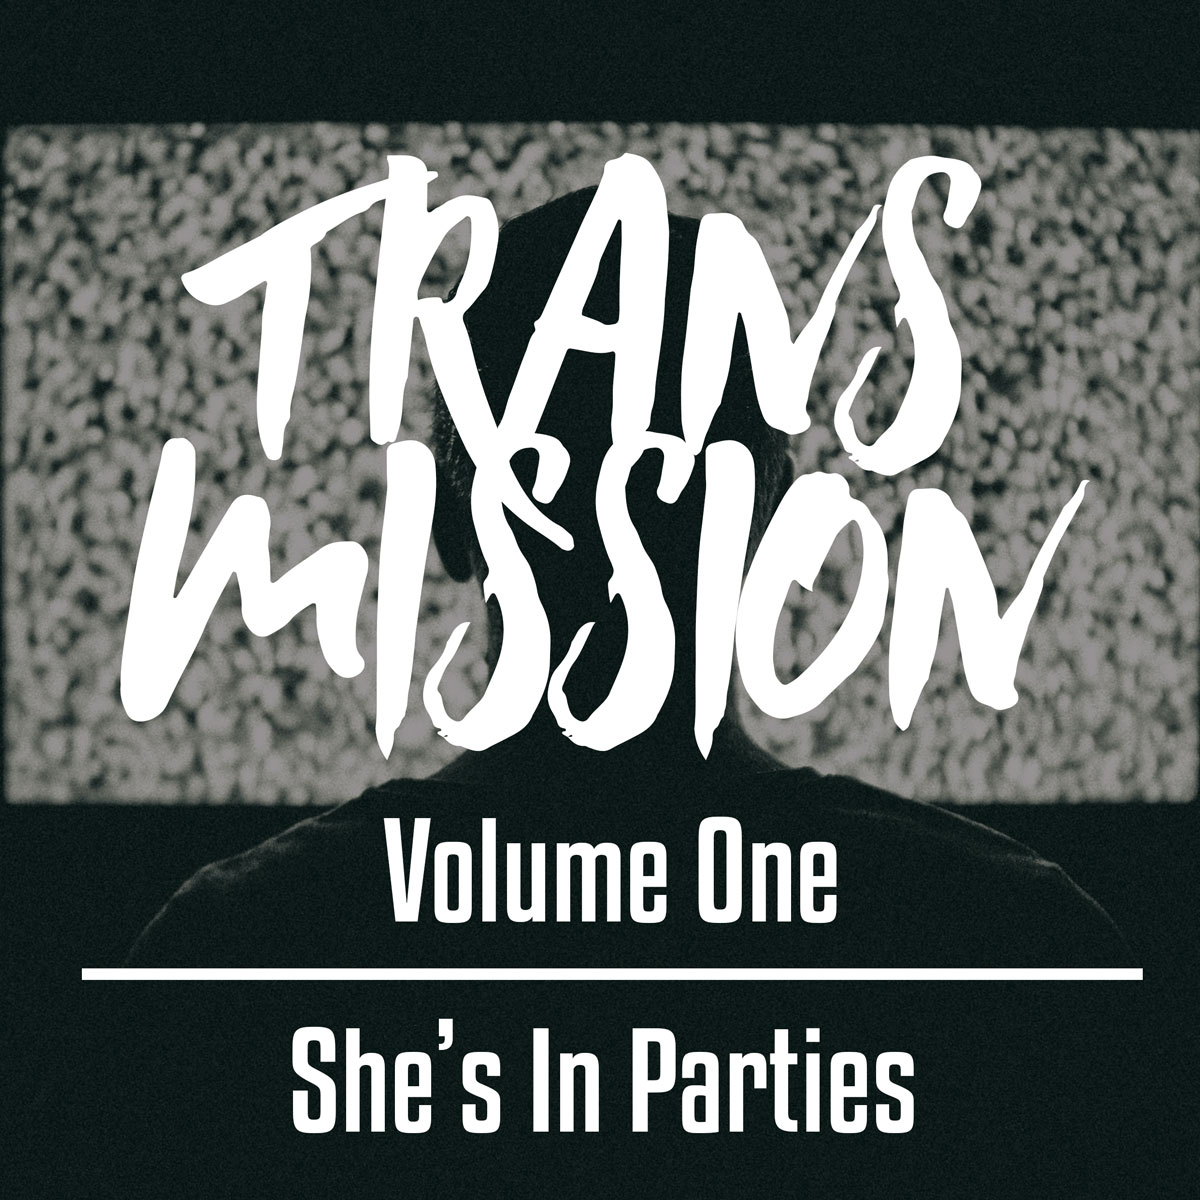 Transmission-shes-in-parties.jpg